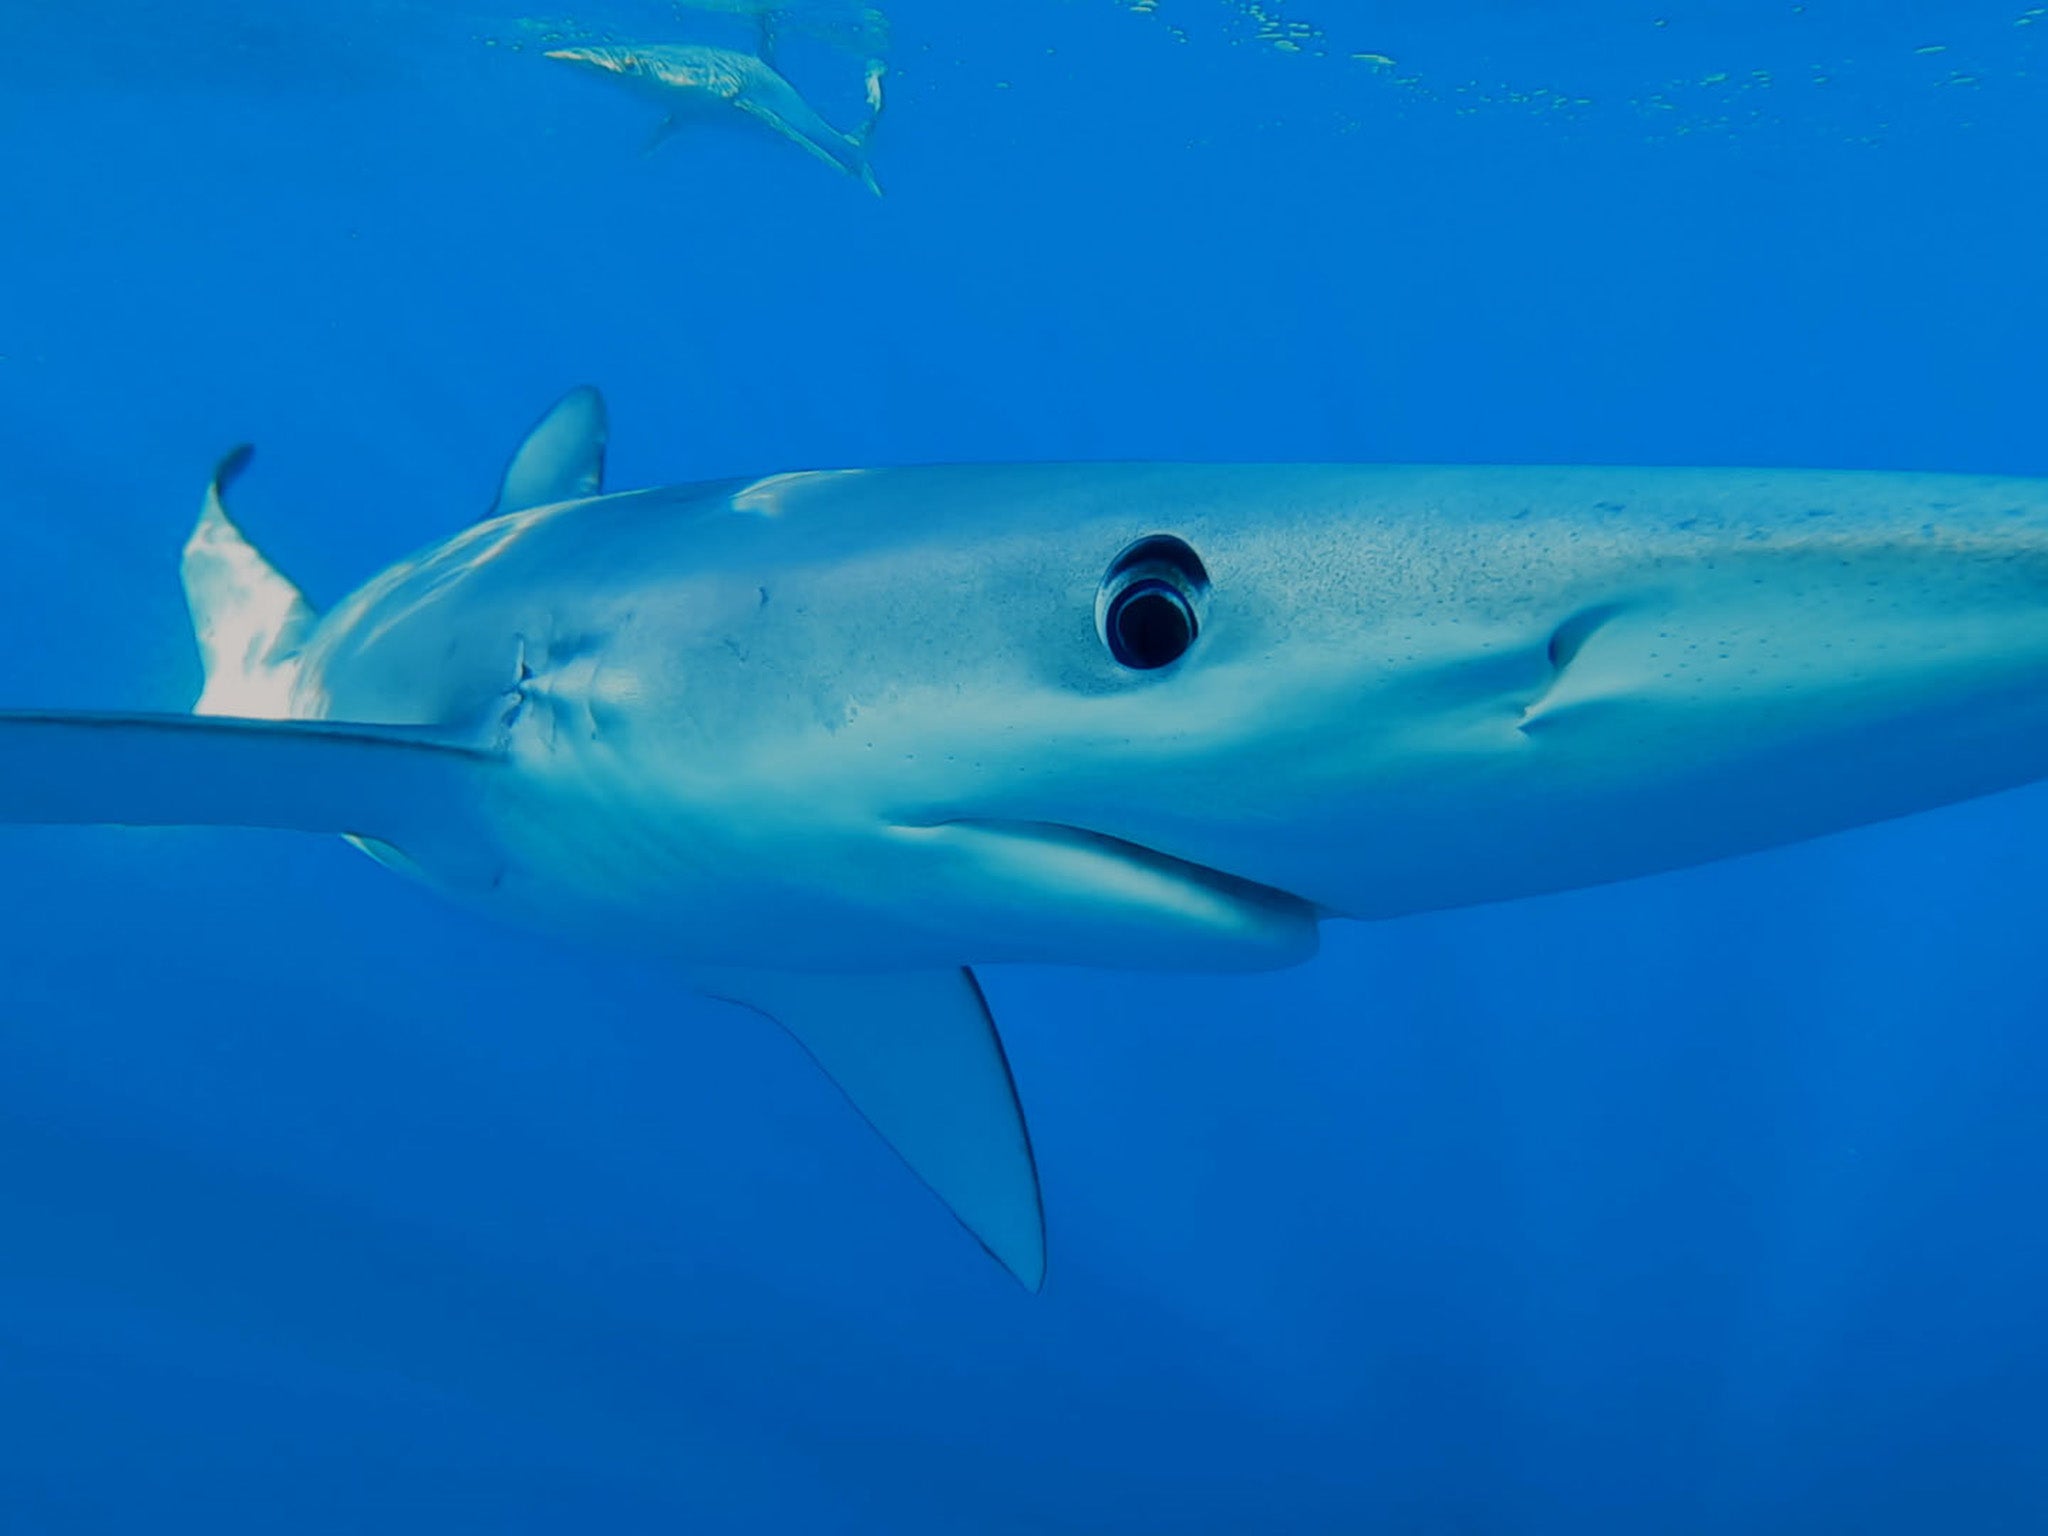 There has been a 71 per cent fall in the global shark population over the past 50 years